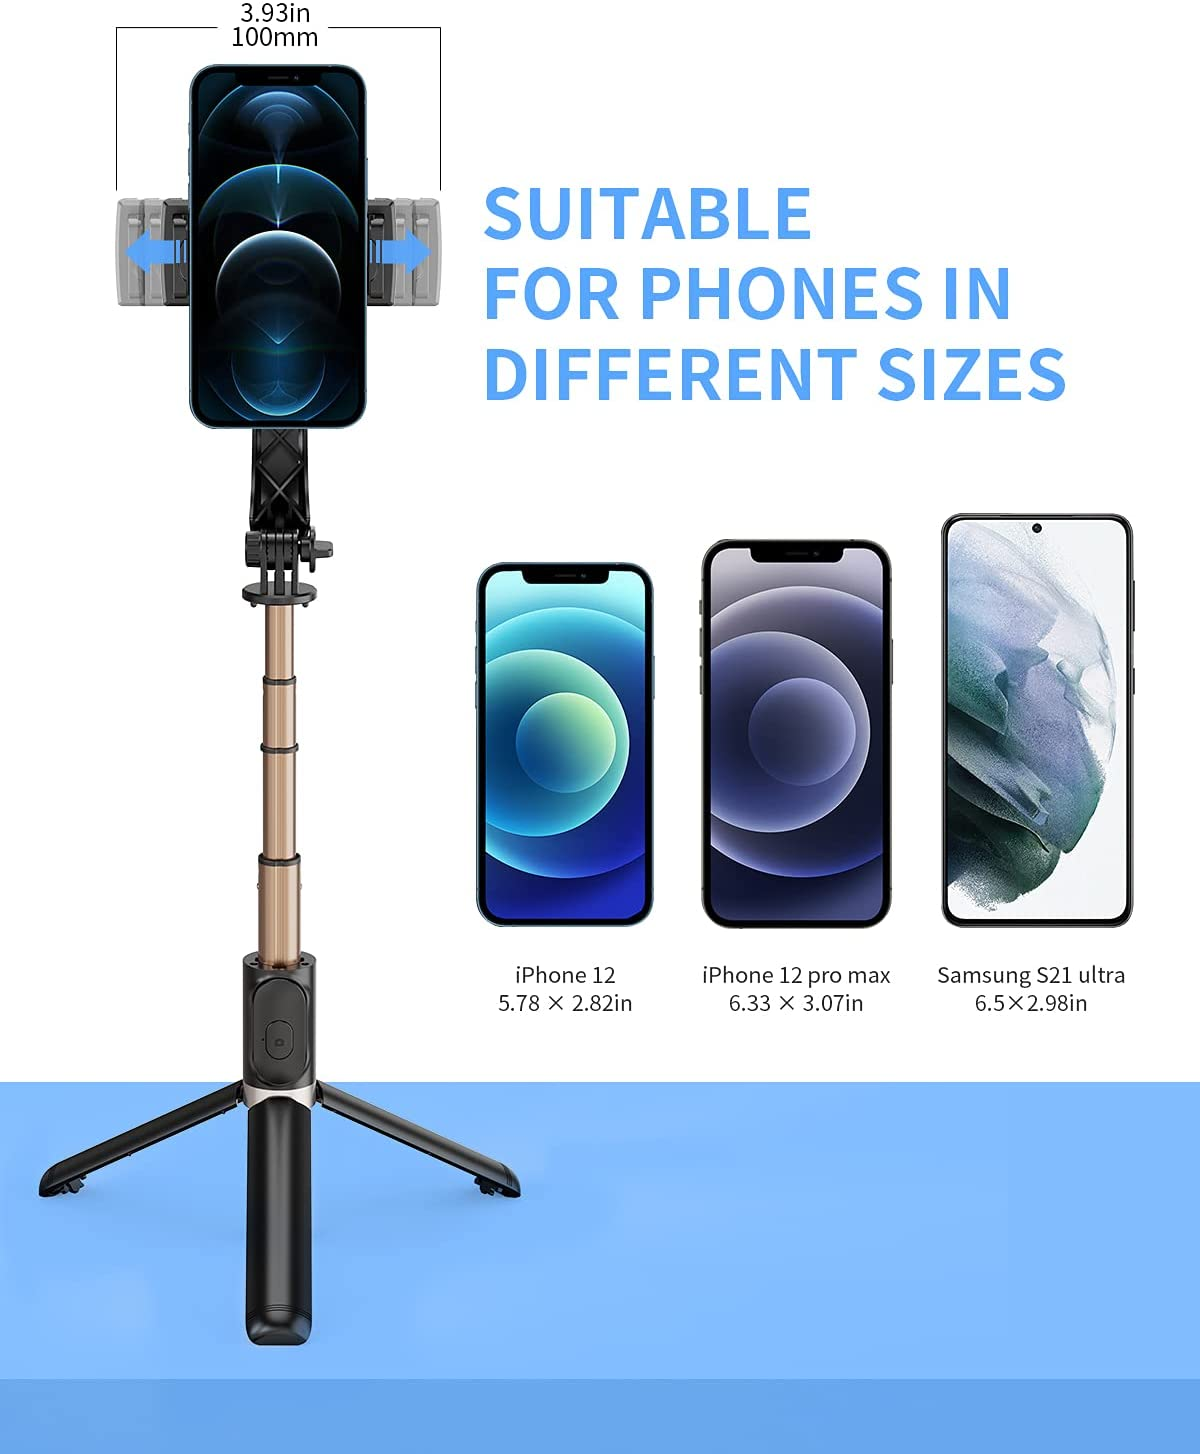 Gimbal Stabilizer with Selfie Stick for Iphone: Portable Handheld Gimble with Tripod & Remote for Cell Phone Camera & Samsung Android Smartphone Recording Video & Vlogging on Tiktok & Youtube